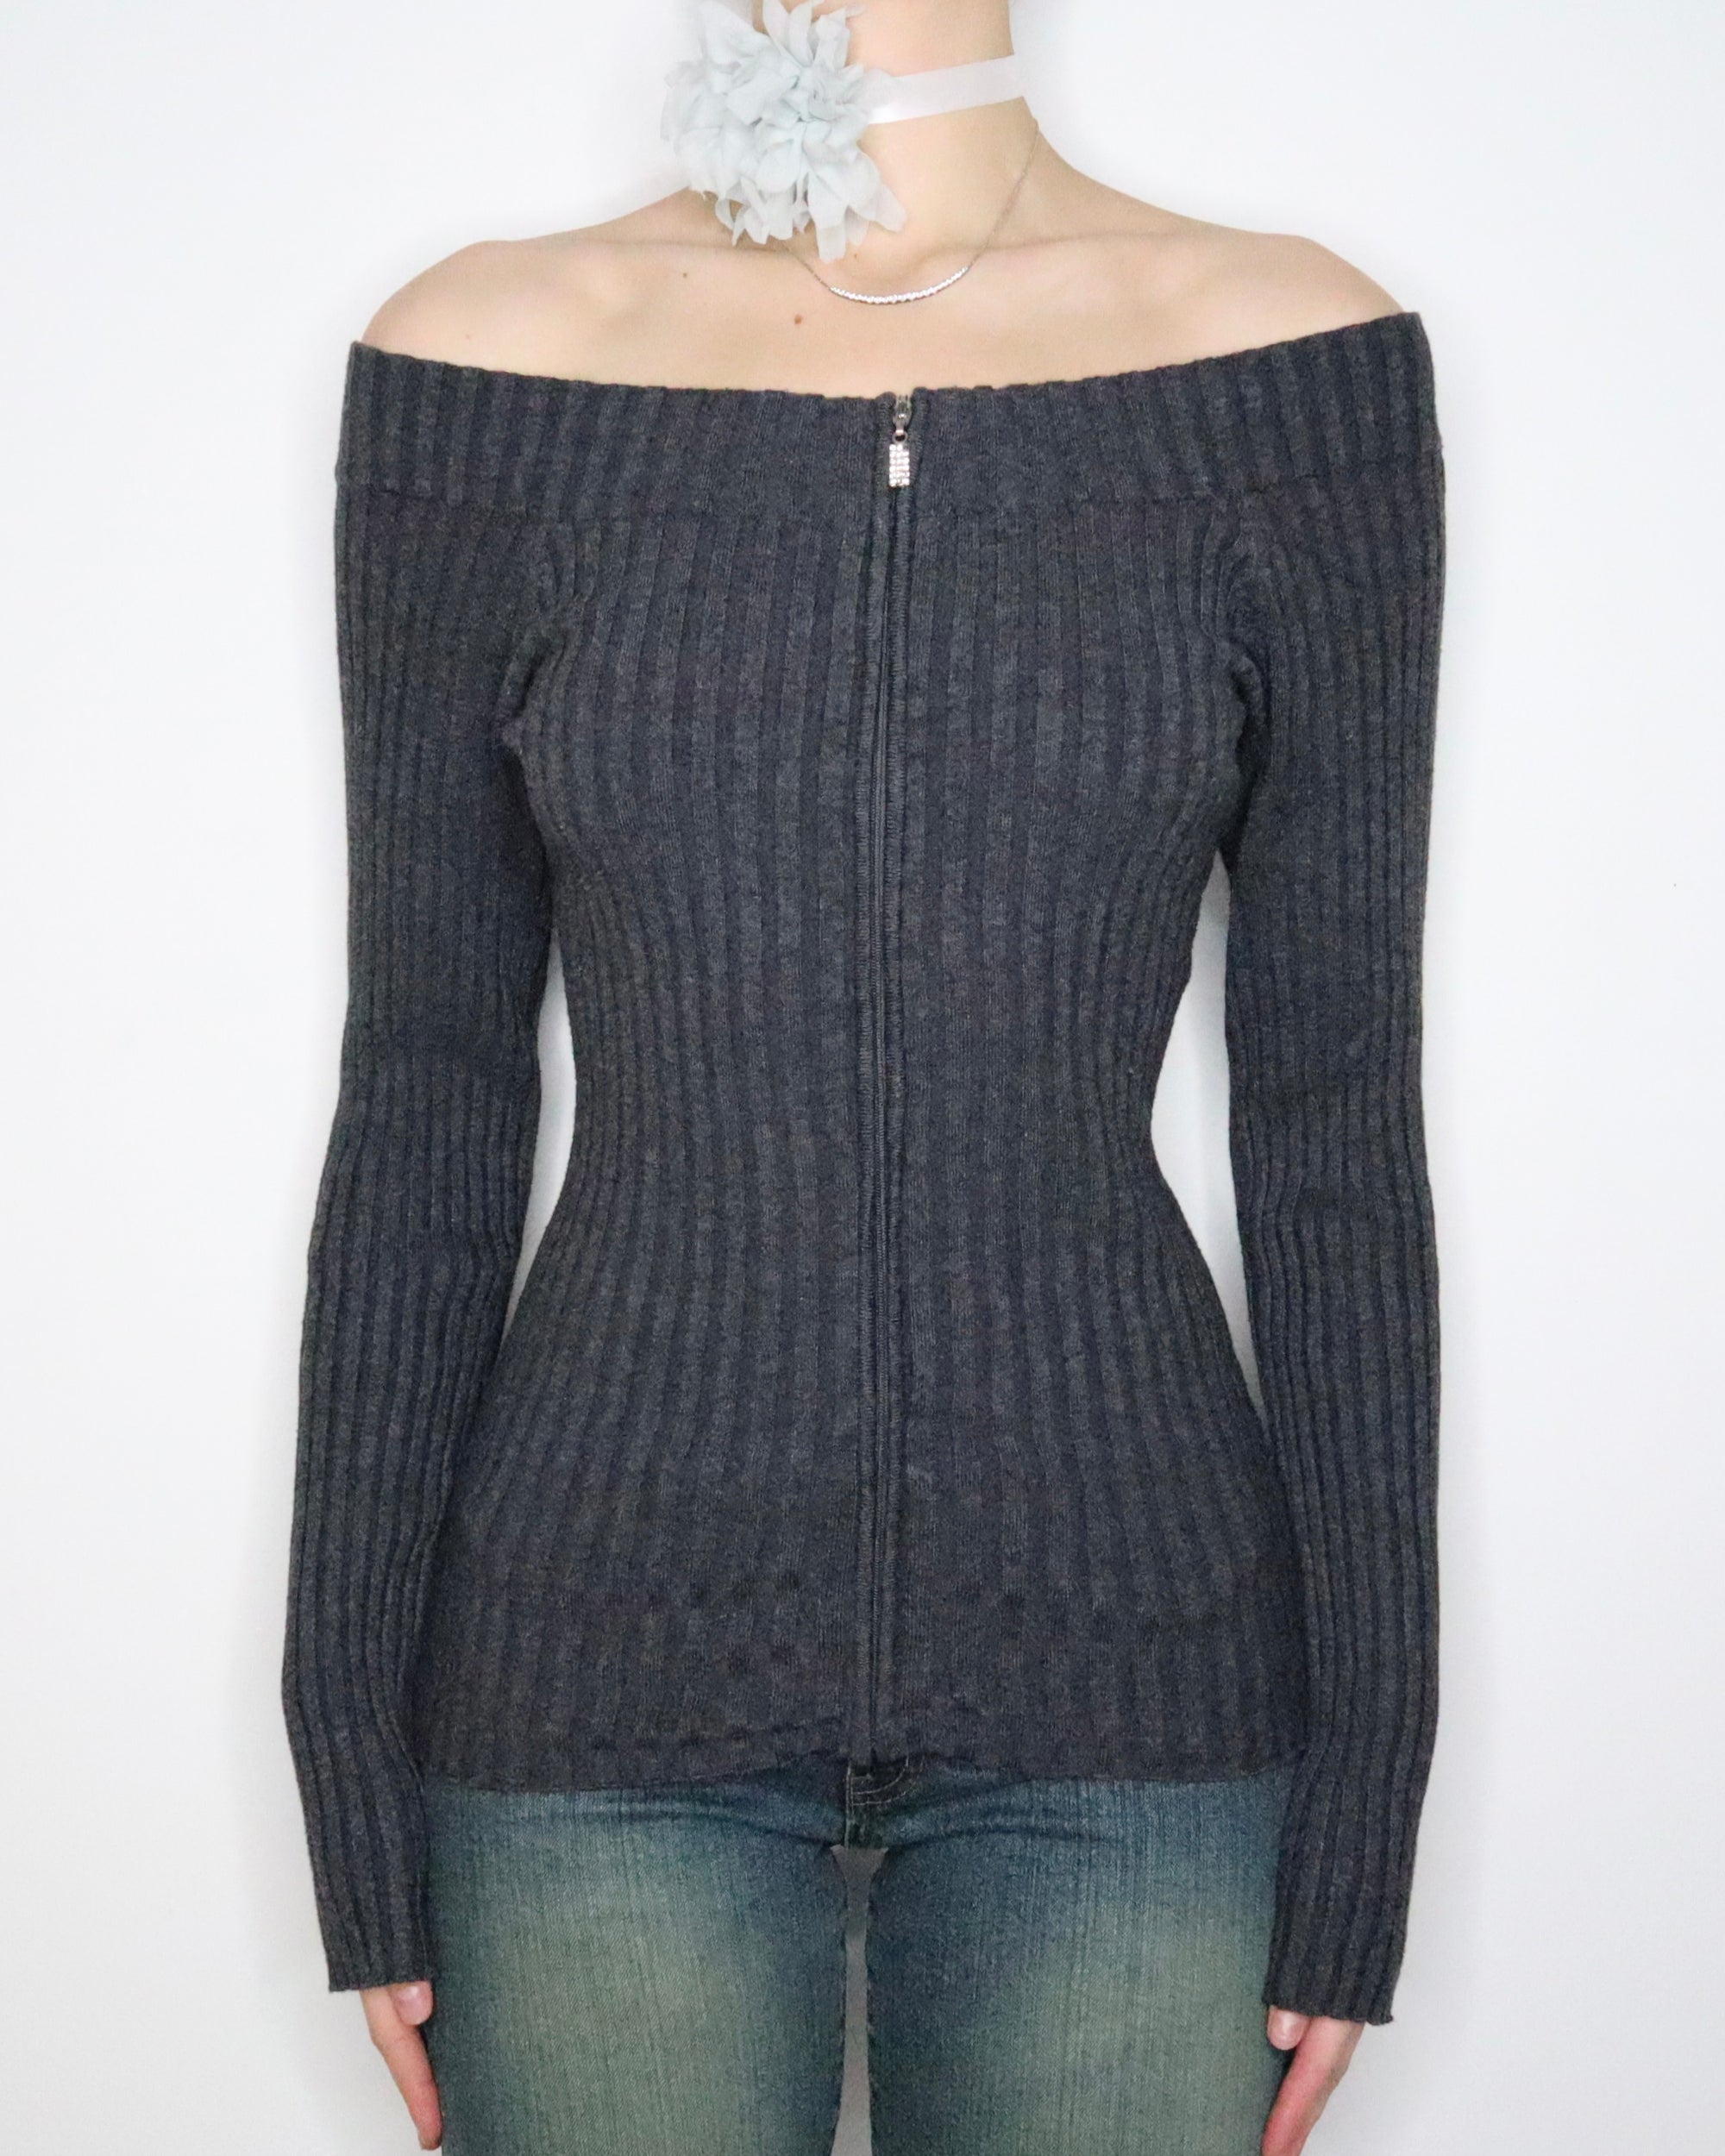 Guess Gray Zip Up Sweater (M-L) 